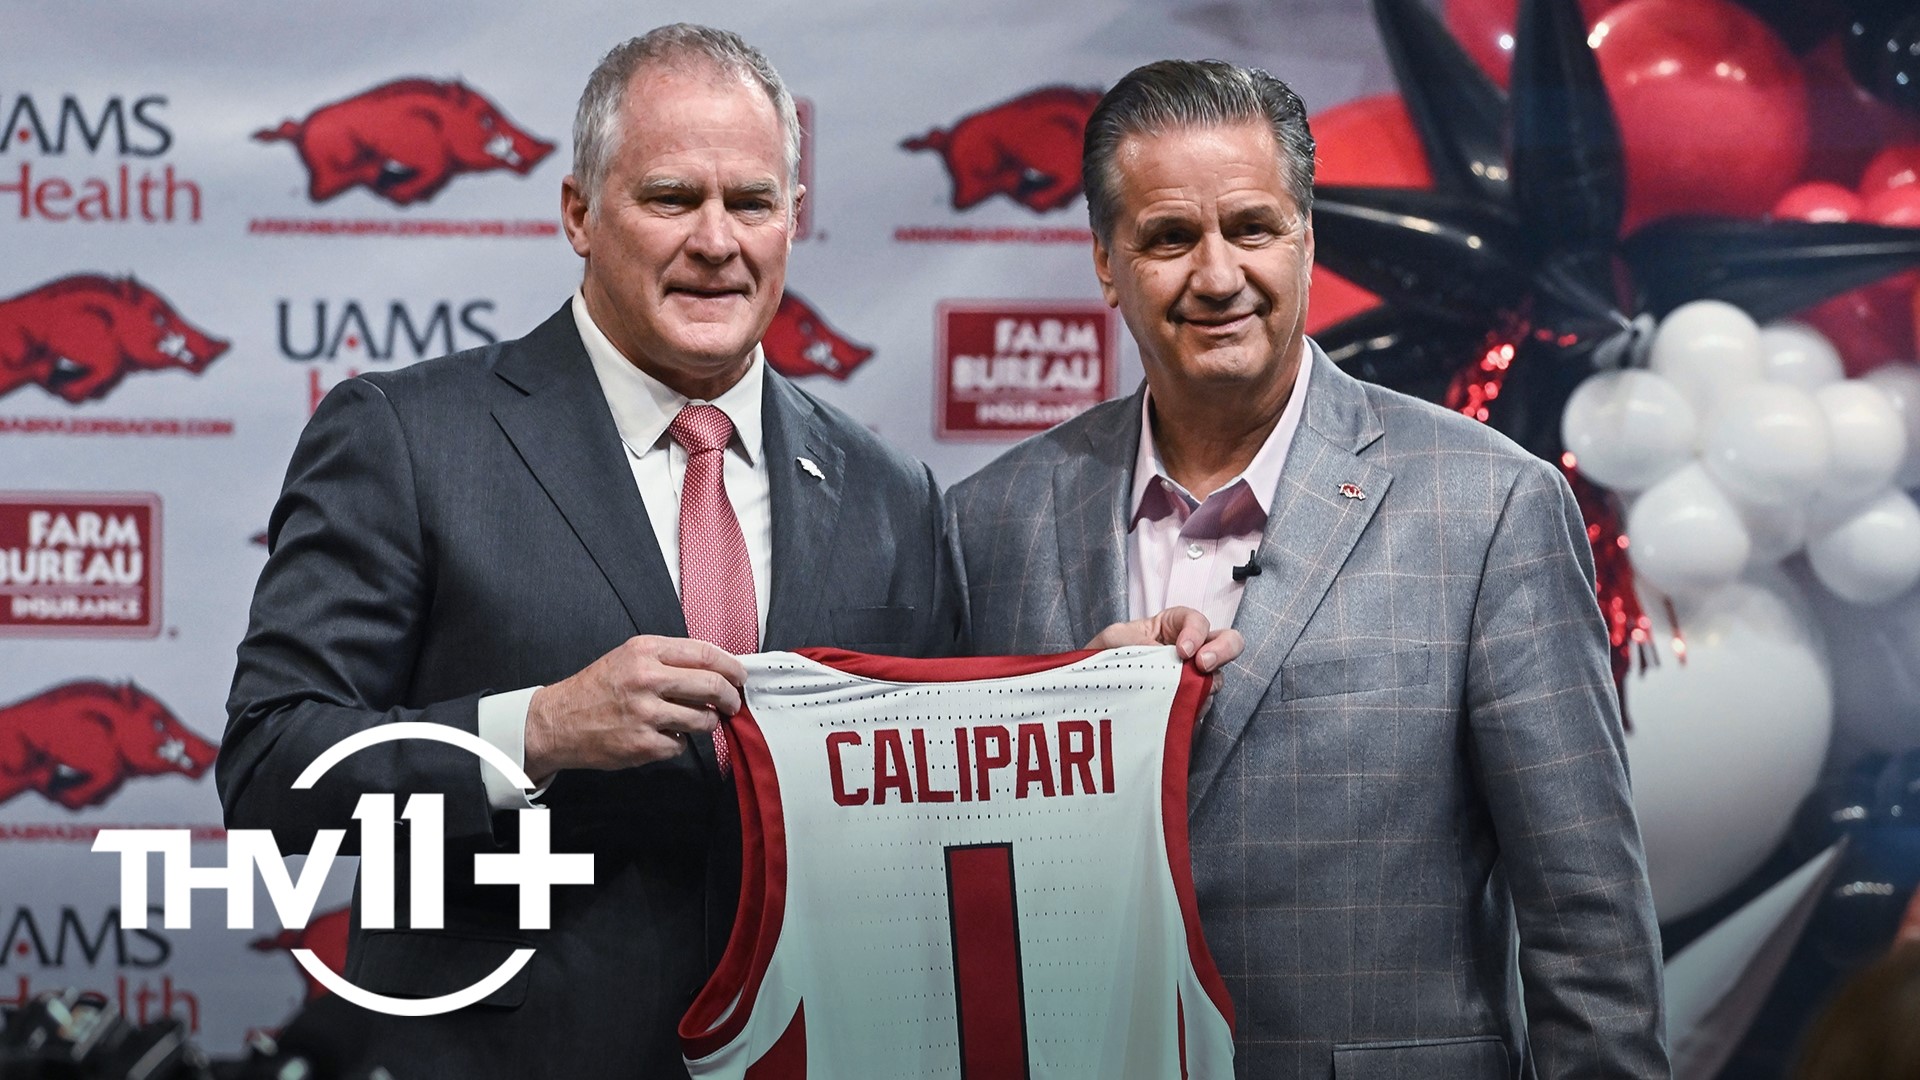 John Calipari received a warm welcome in Fayetteville on Wednesday, walking into Bud Walton Arena for the first time as the head coach of the Arkansas Razorbacks.